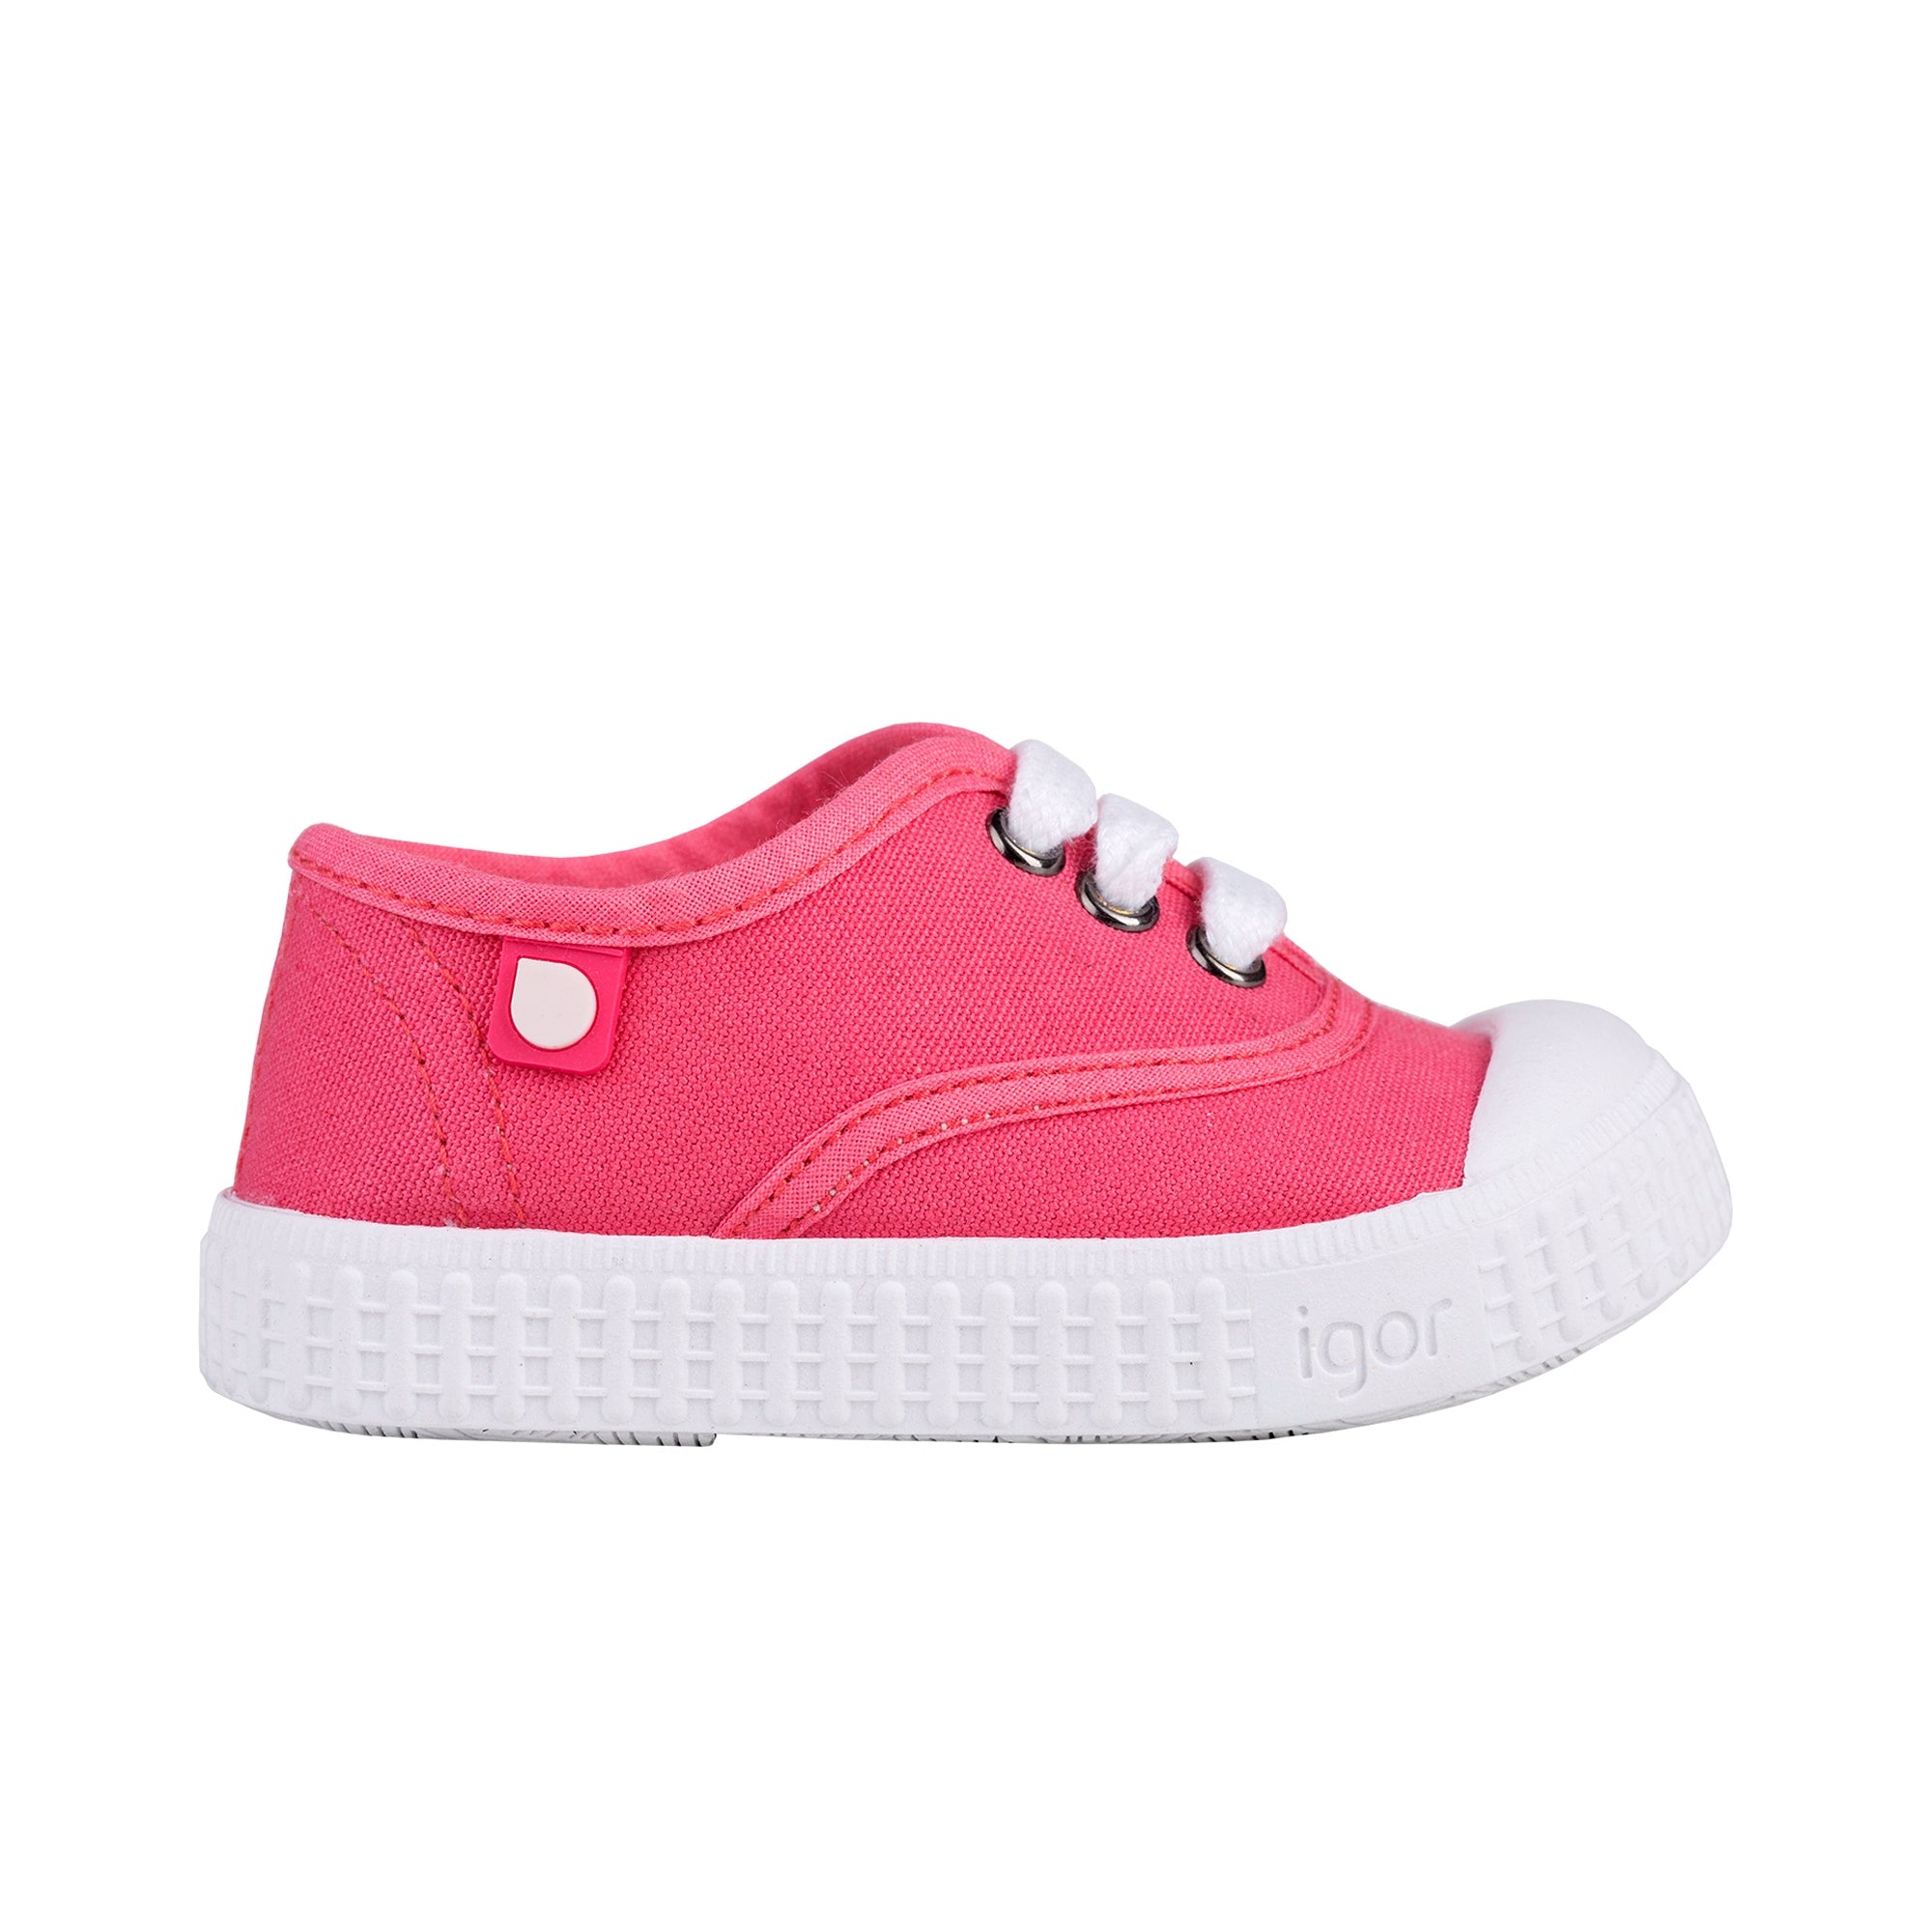 Girls Pink Cotton Shoes